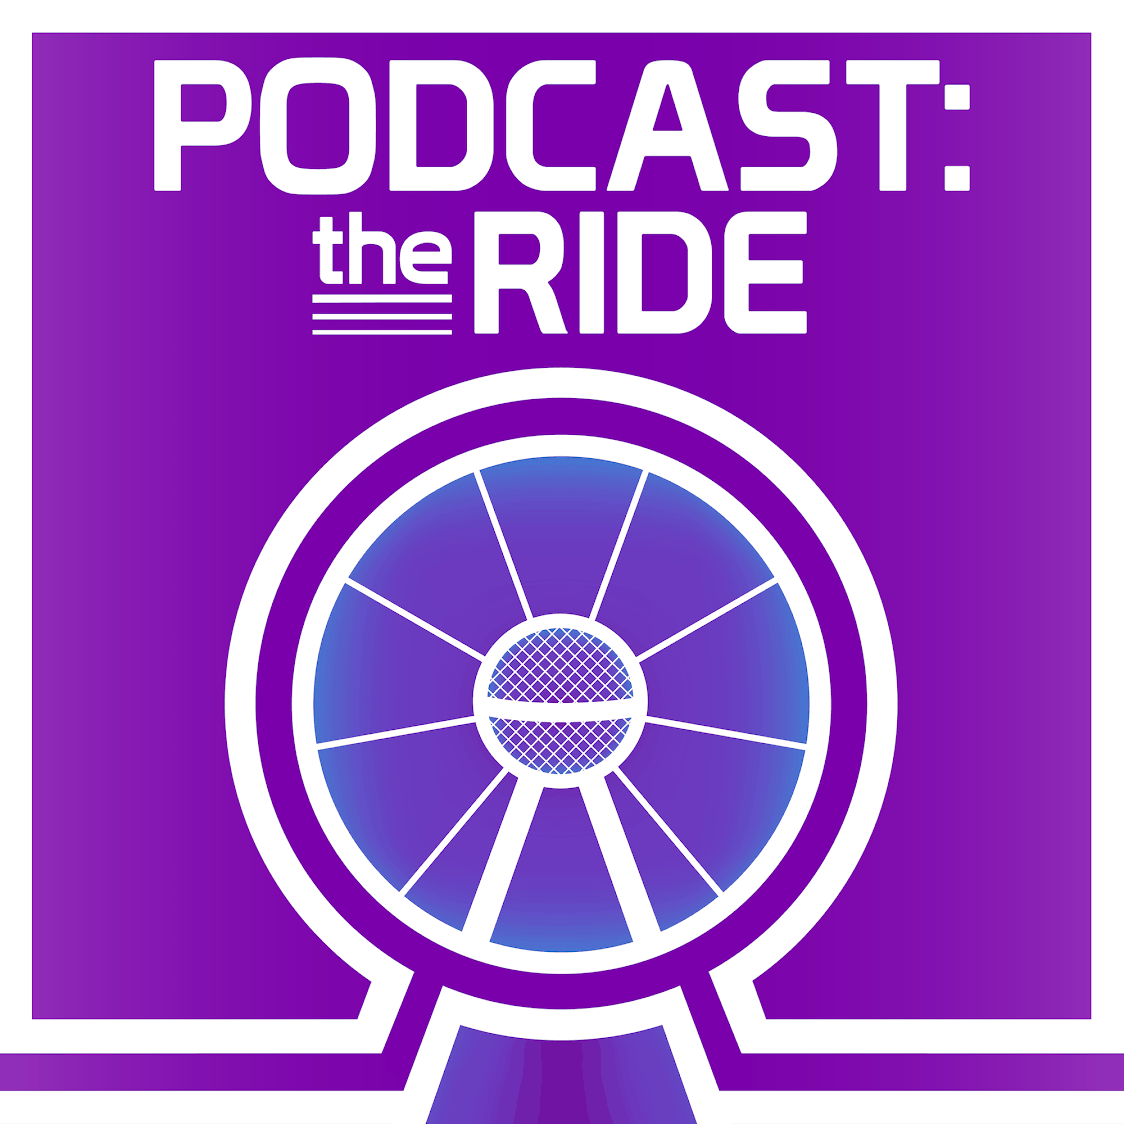 Podcast: The Ride | Forever Dog Podcast Network